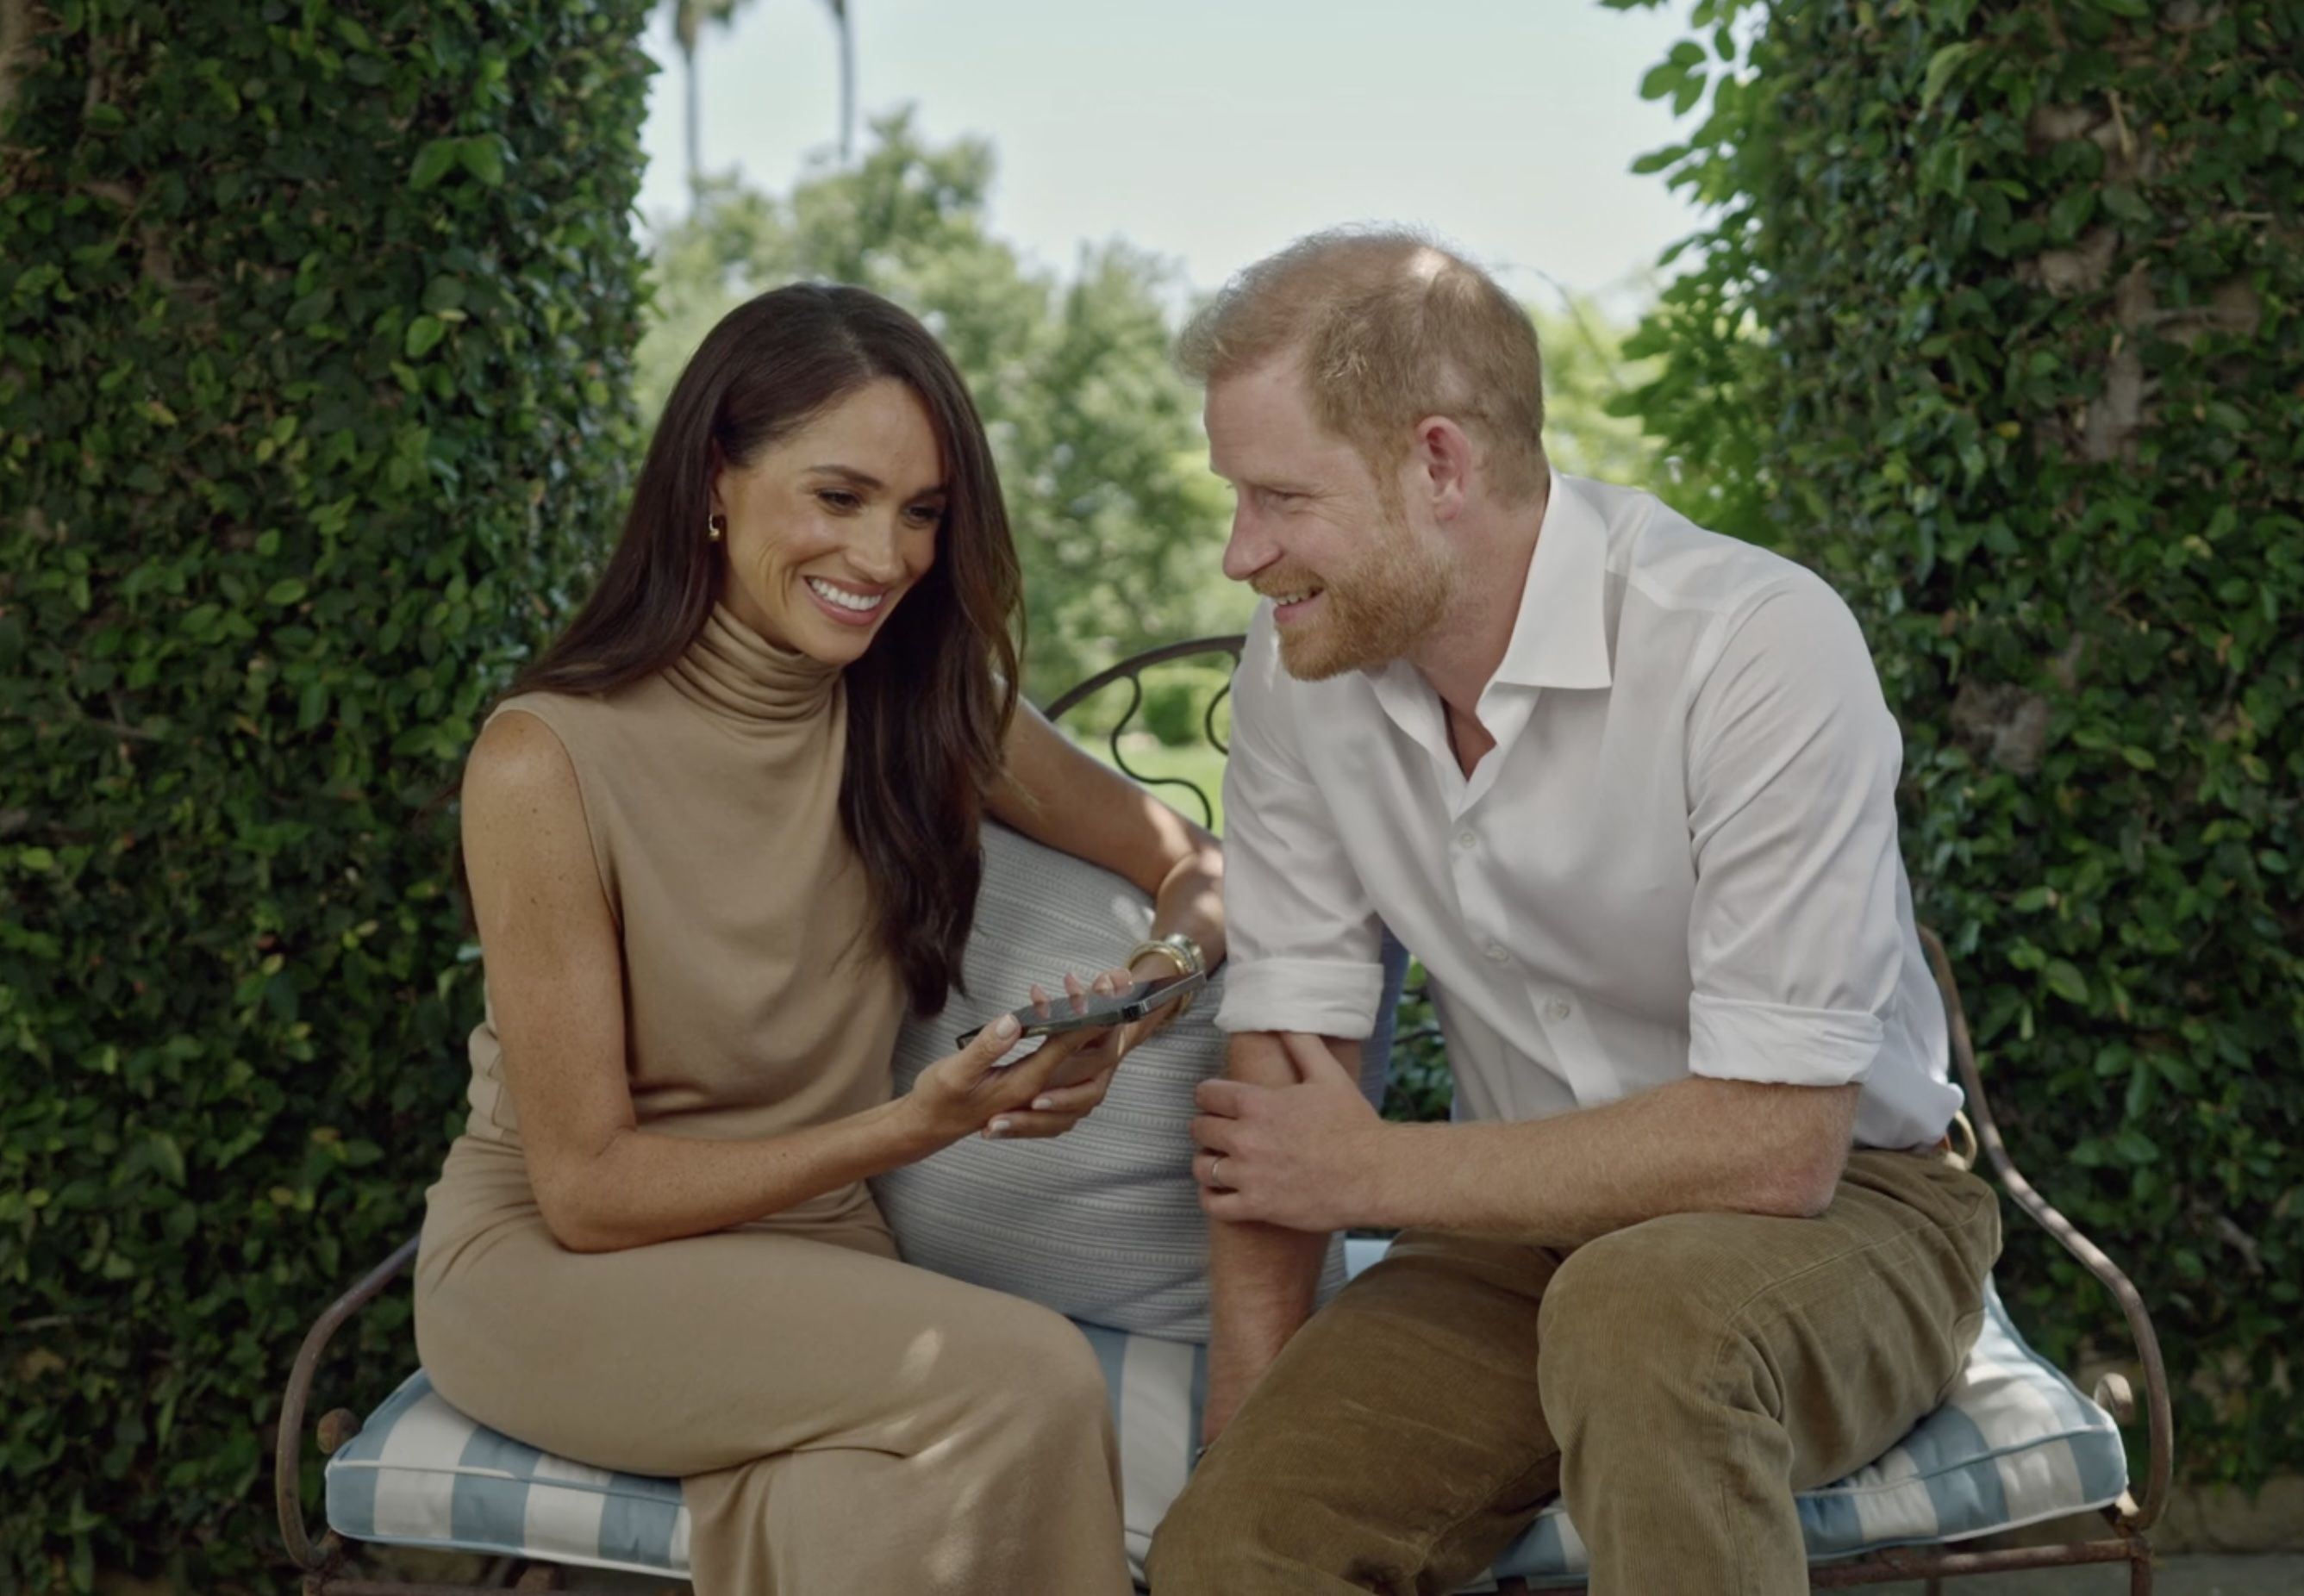 Video Prince Harry and Meghan Markle Make Appearance to Help Young Leaders photo